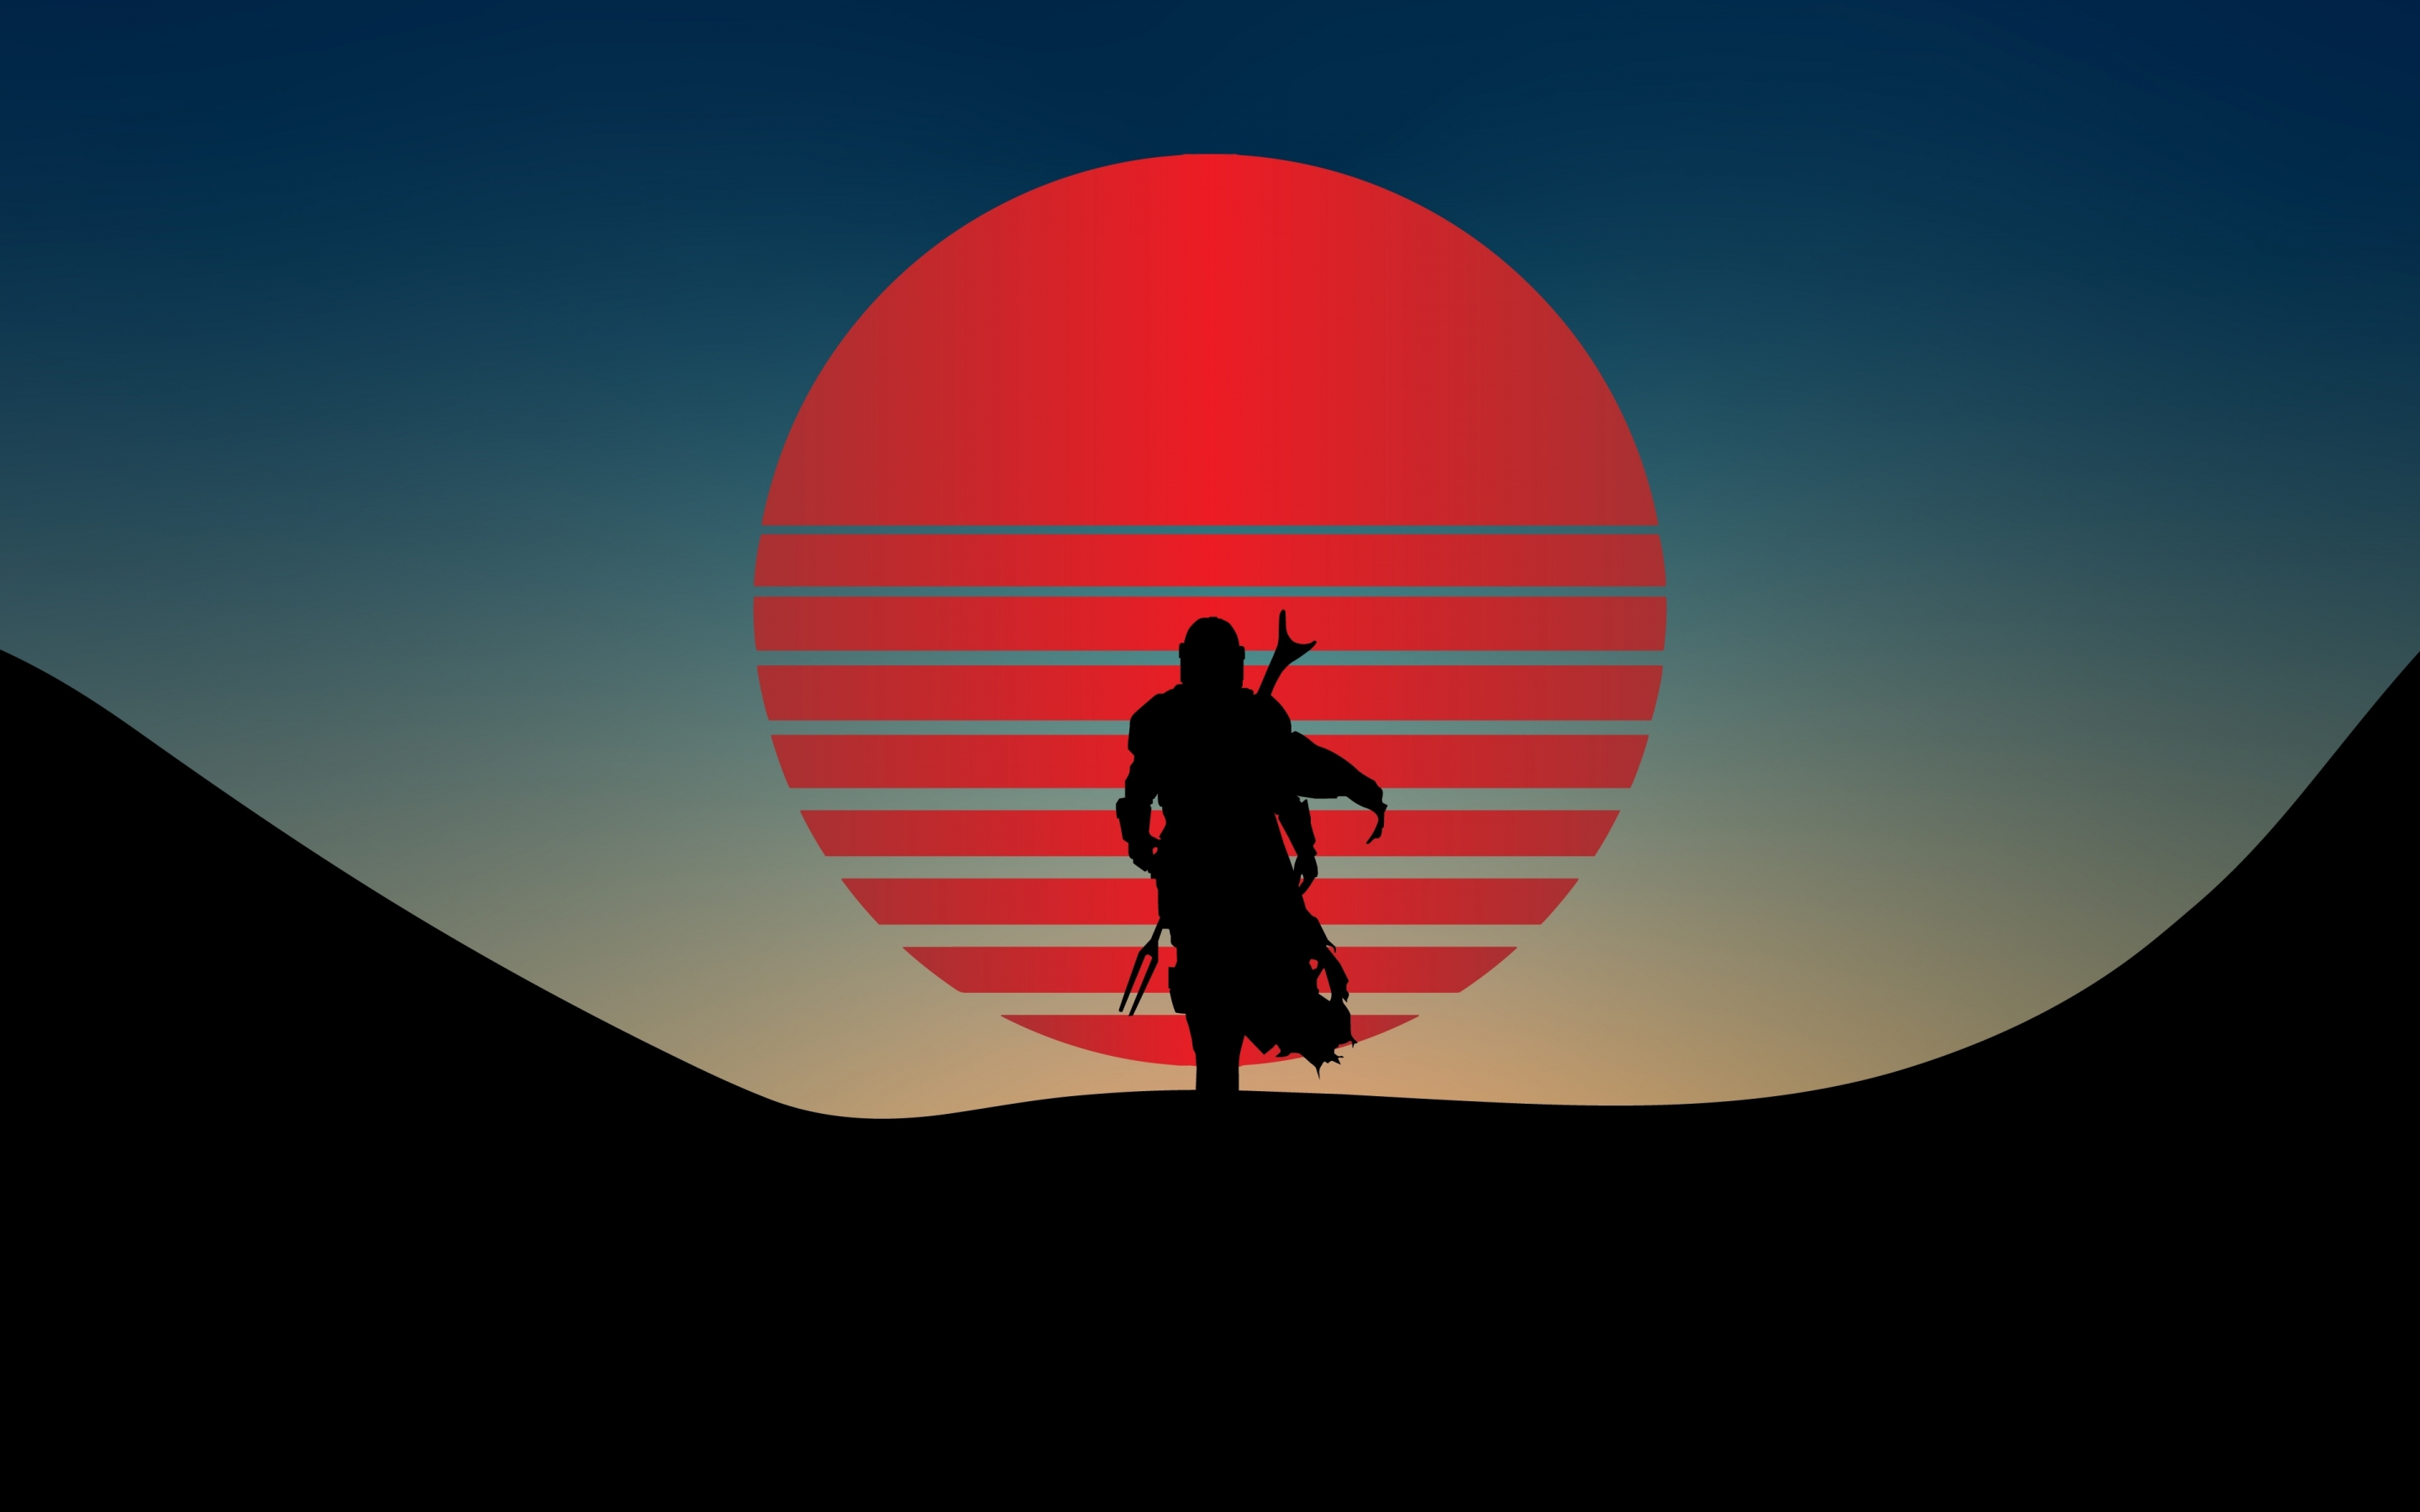 Star Wars inspired dual screen wallpapers by Twelve South